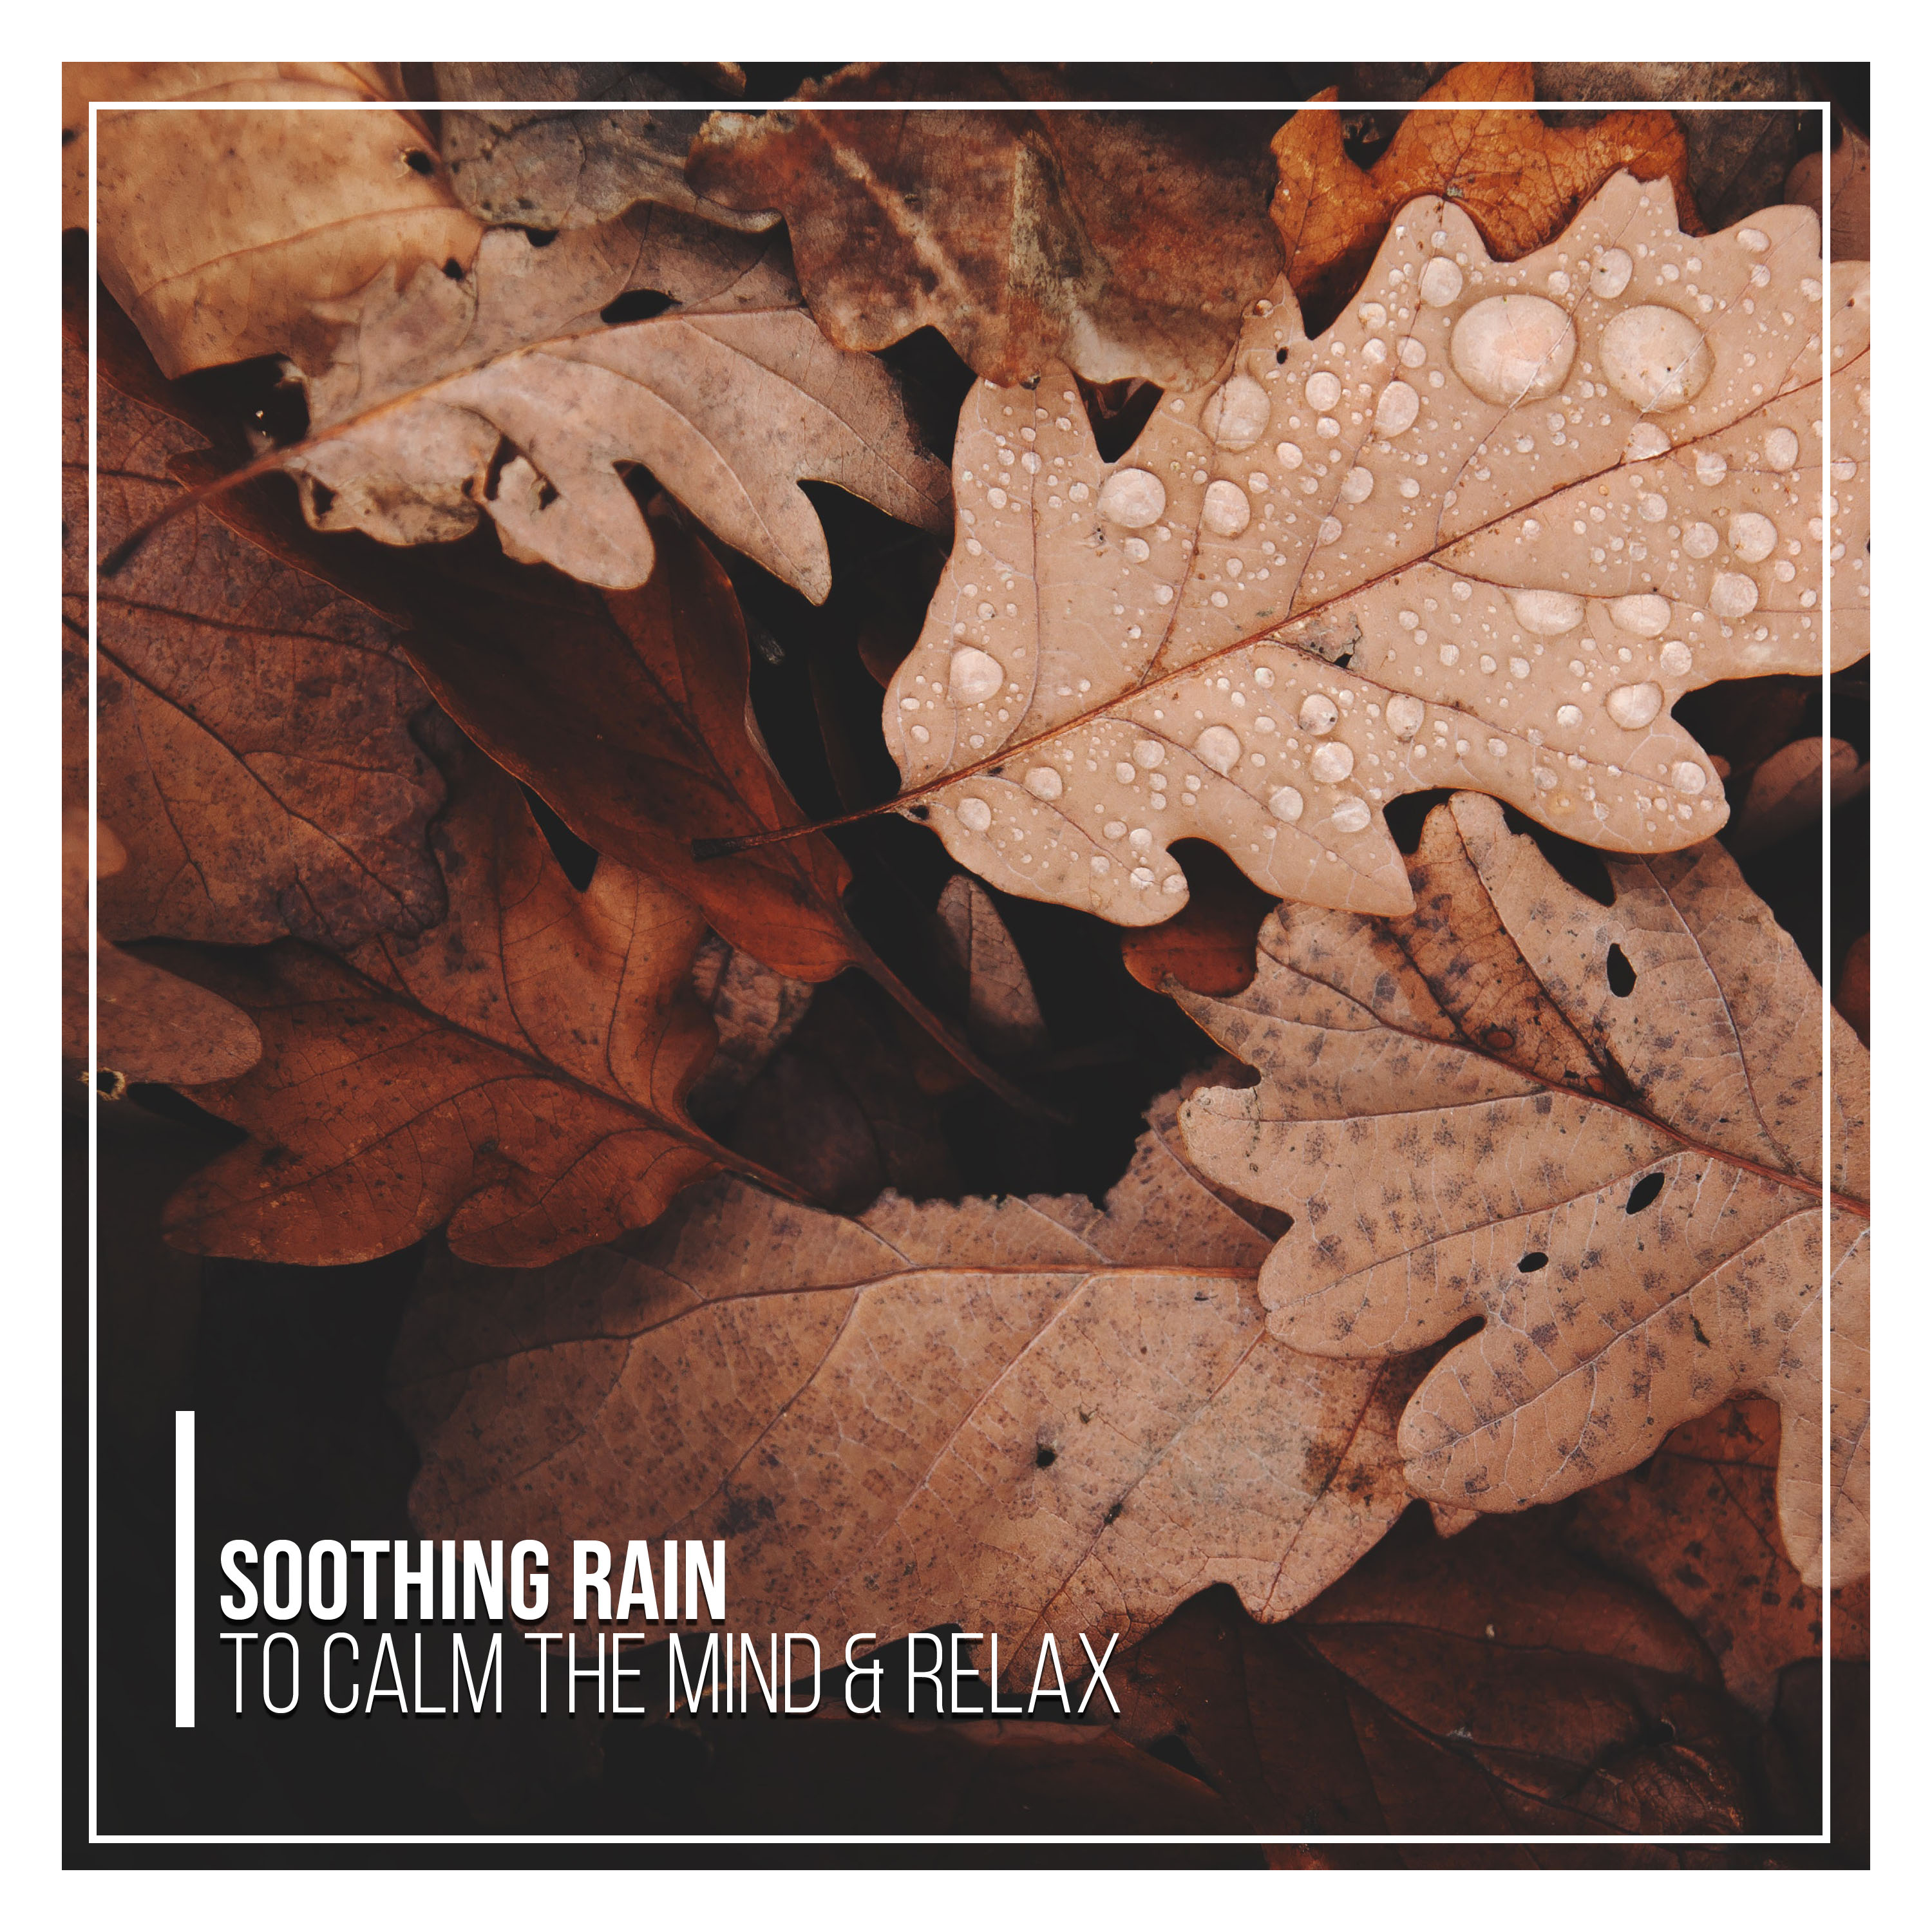 #15 Soothing Rain Tracks to Calm the Mind & Relax